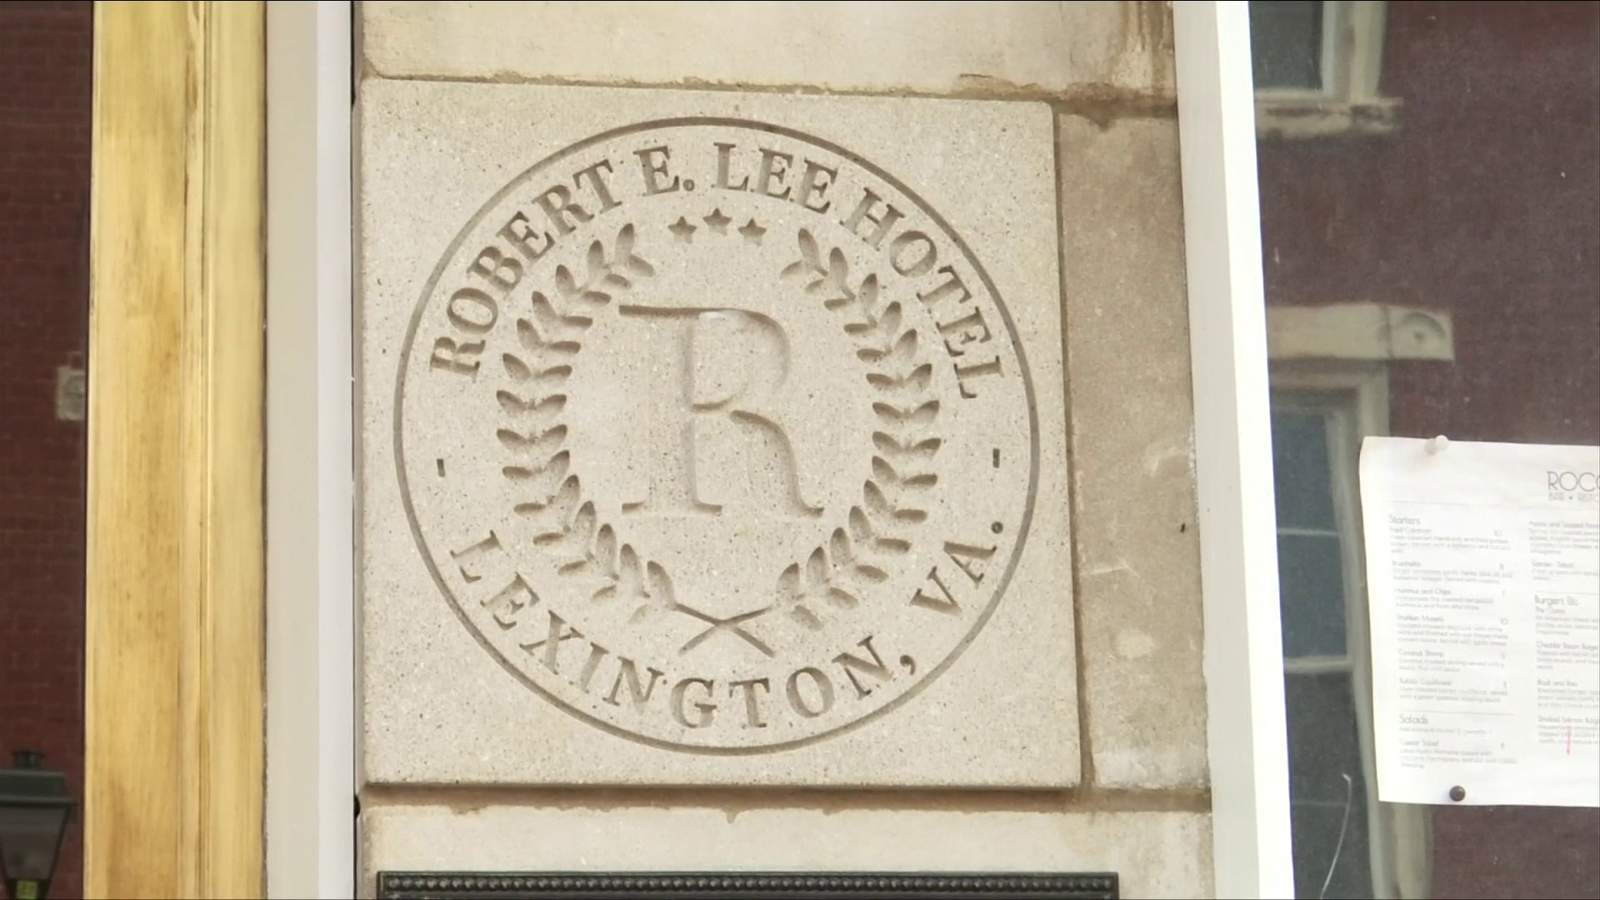 Lexington’s Robert E. Lee hotel changing its name to ‘The Gin'